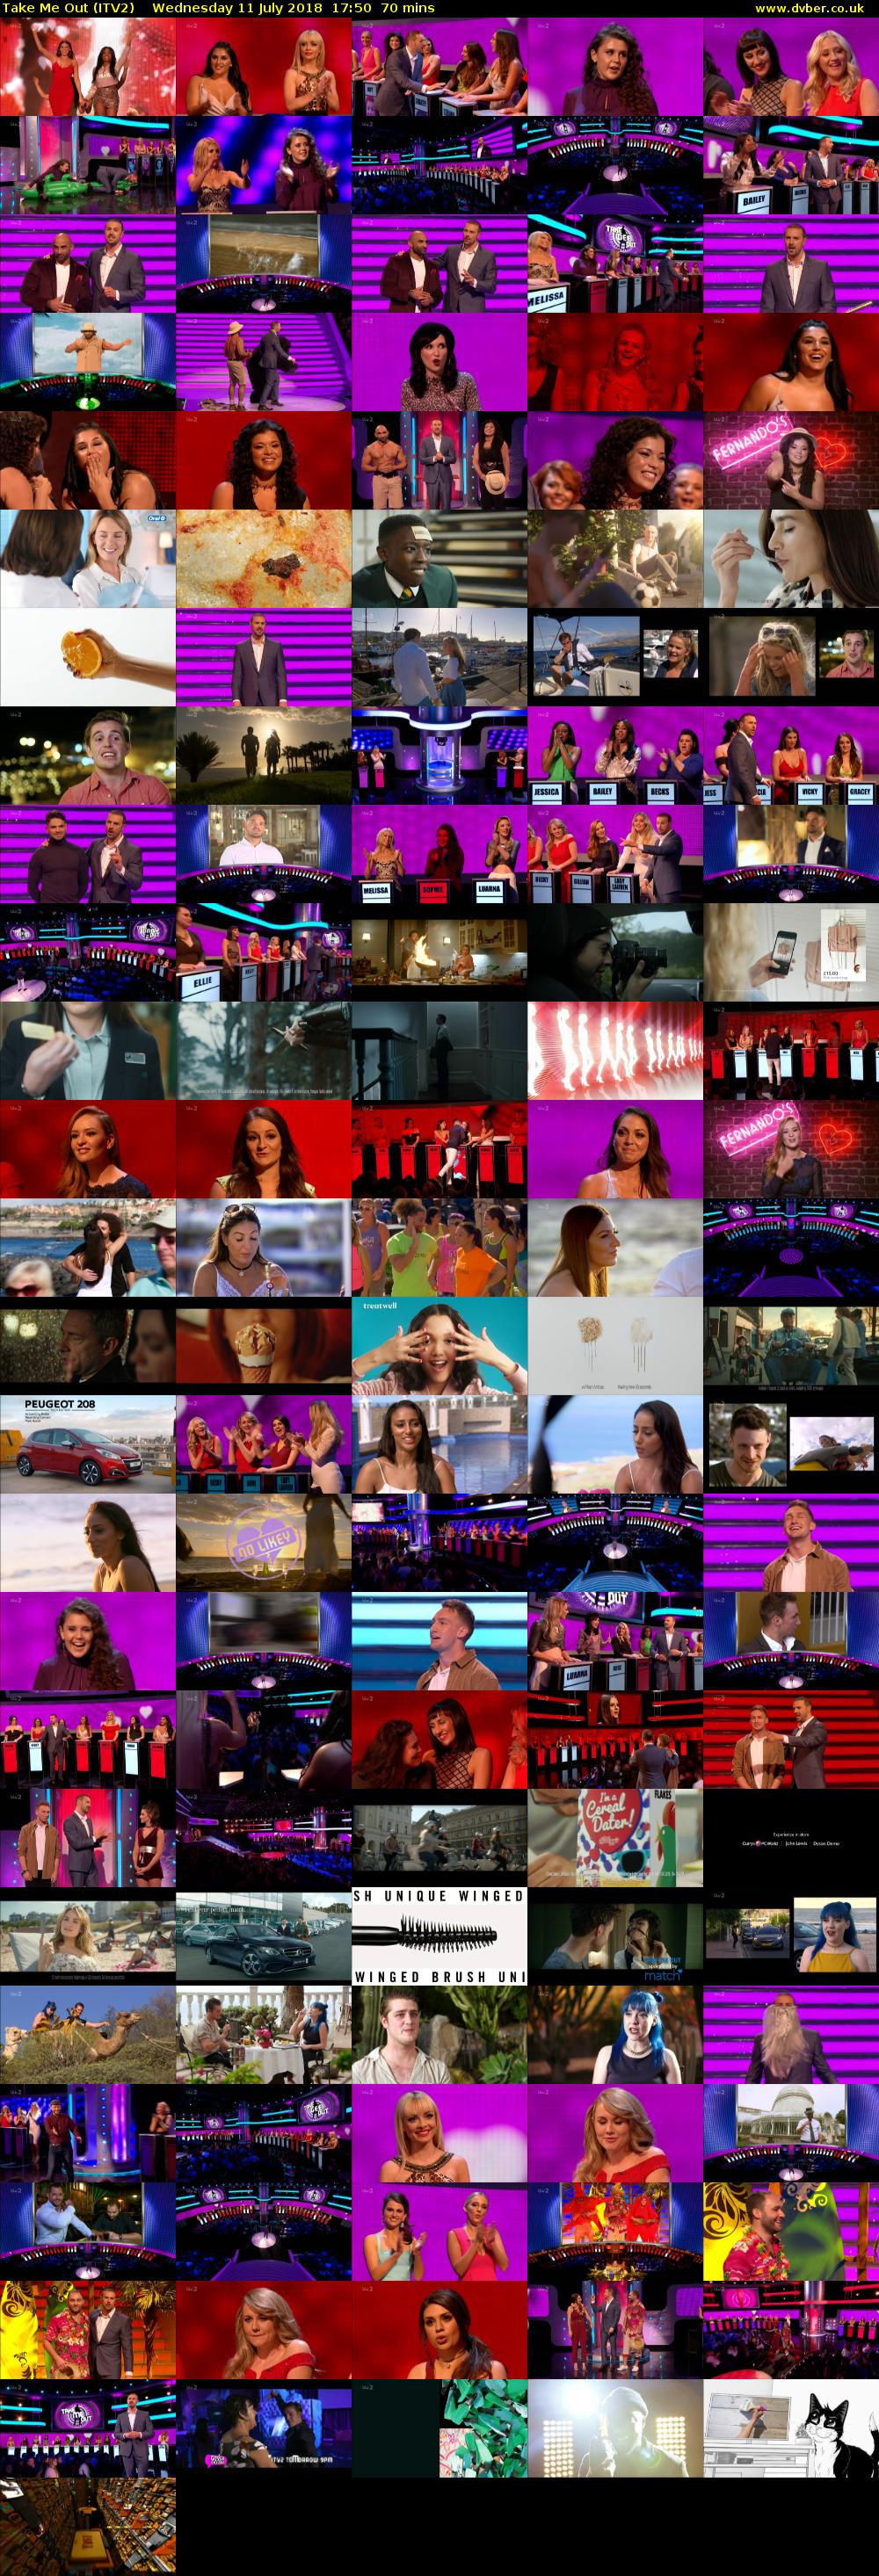 Take Me Out (ITV2) Wednesday 11 July 2018 17:50 - 19:00